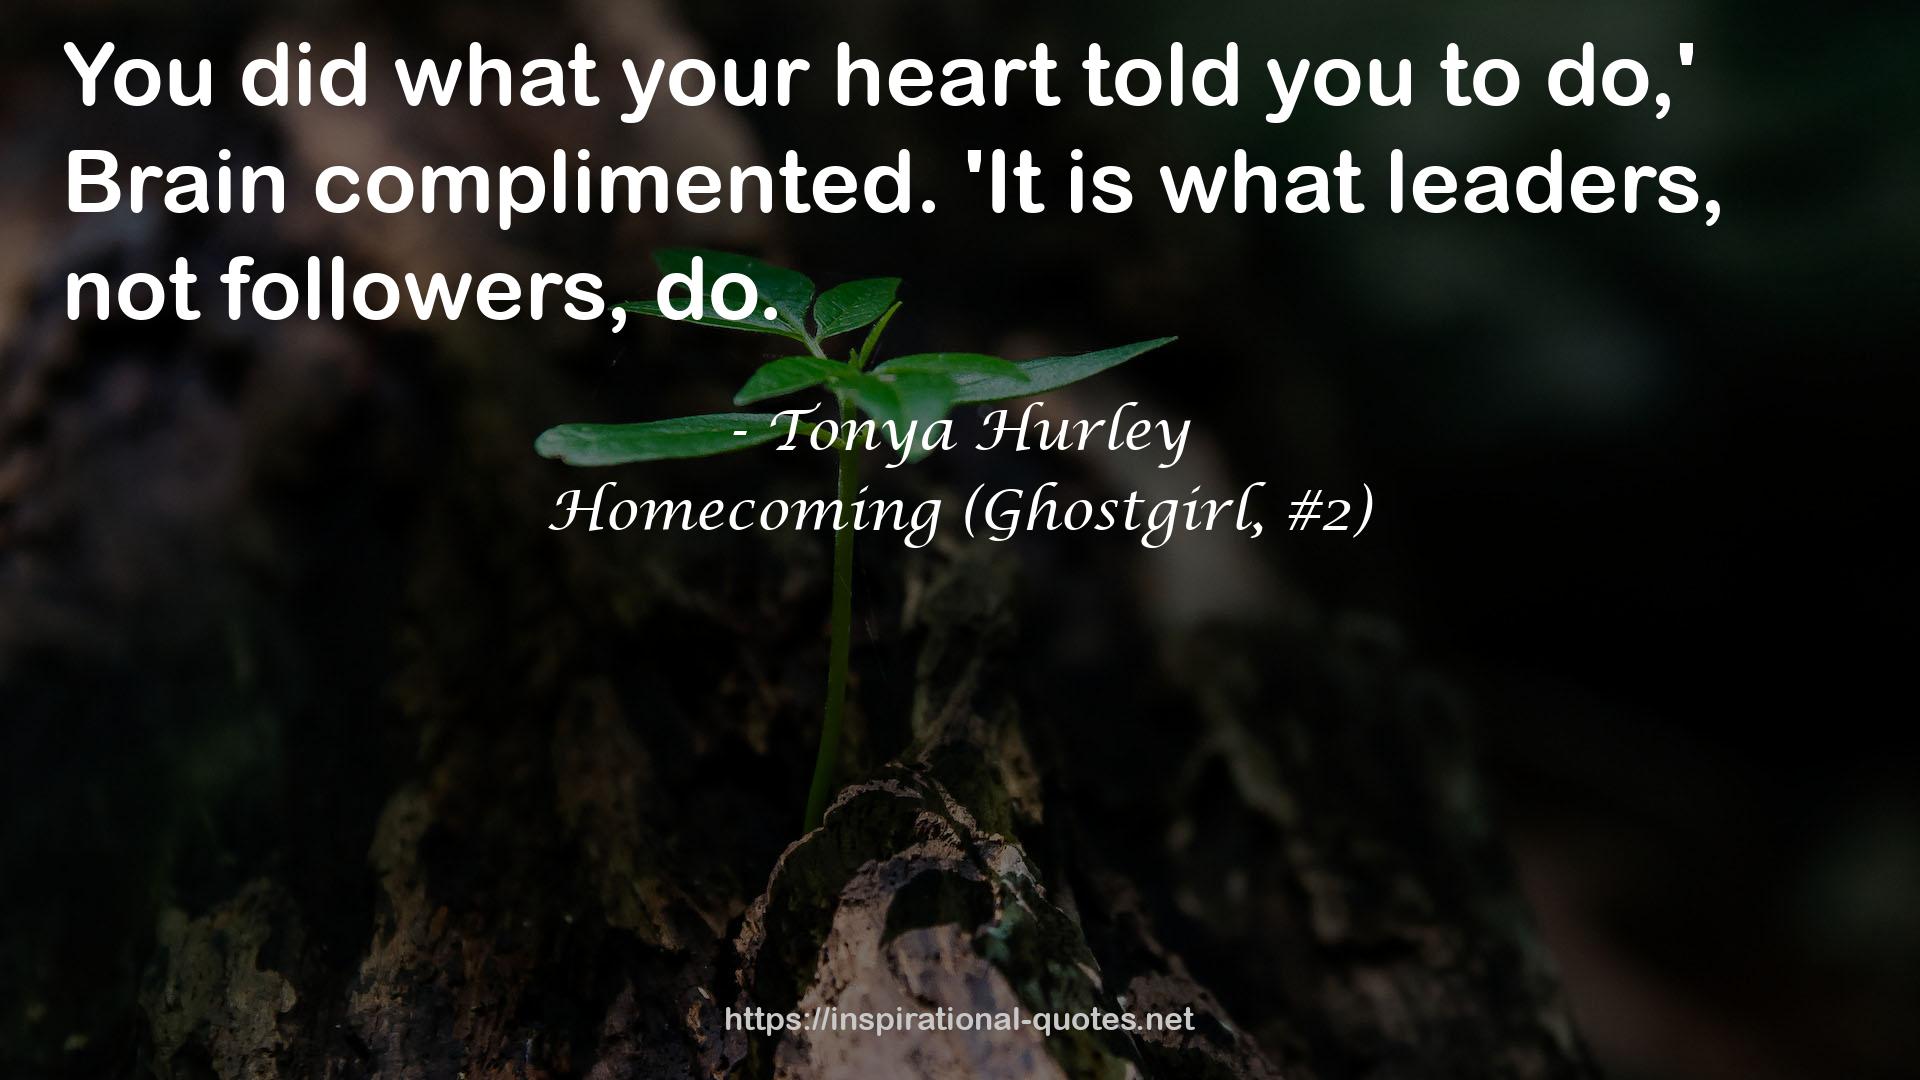 Homecoming (Ghostgirl, #2) QUOTES